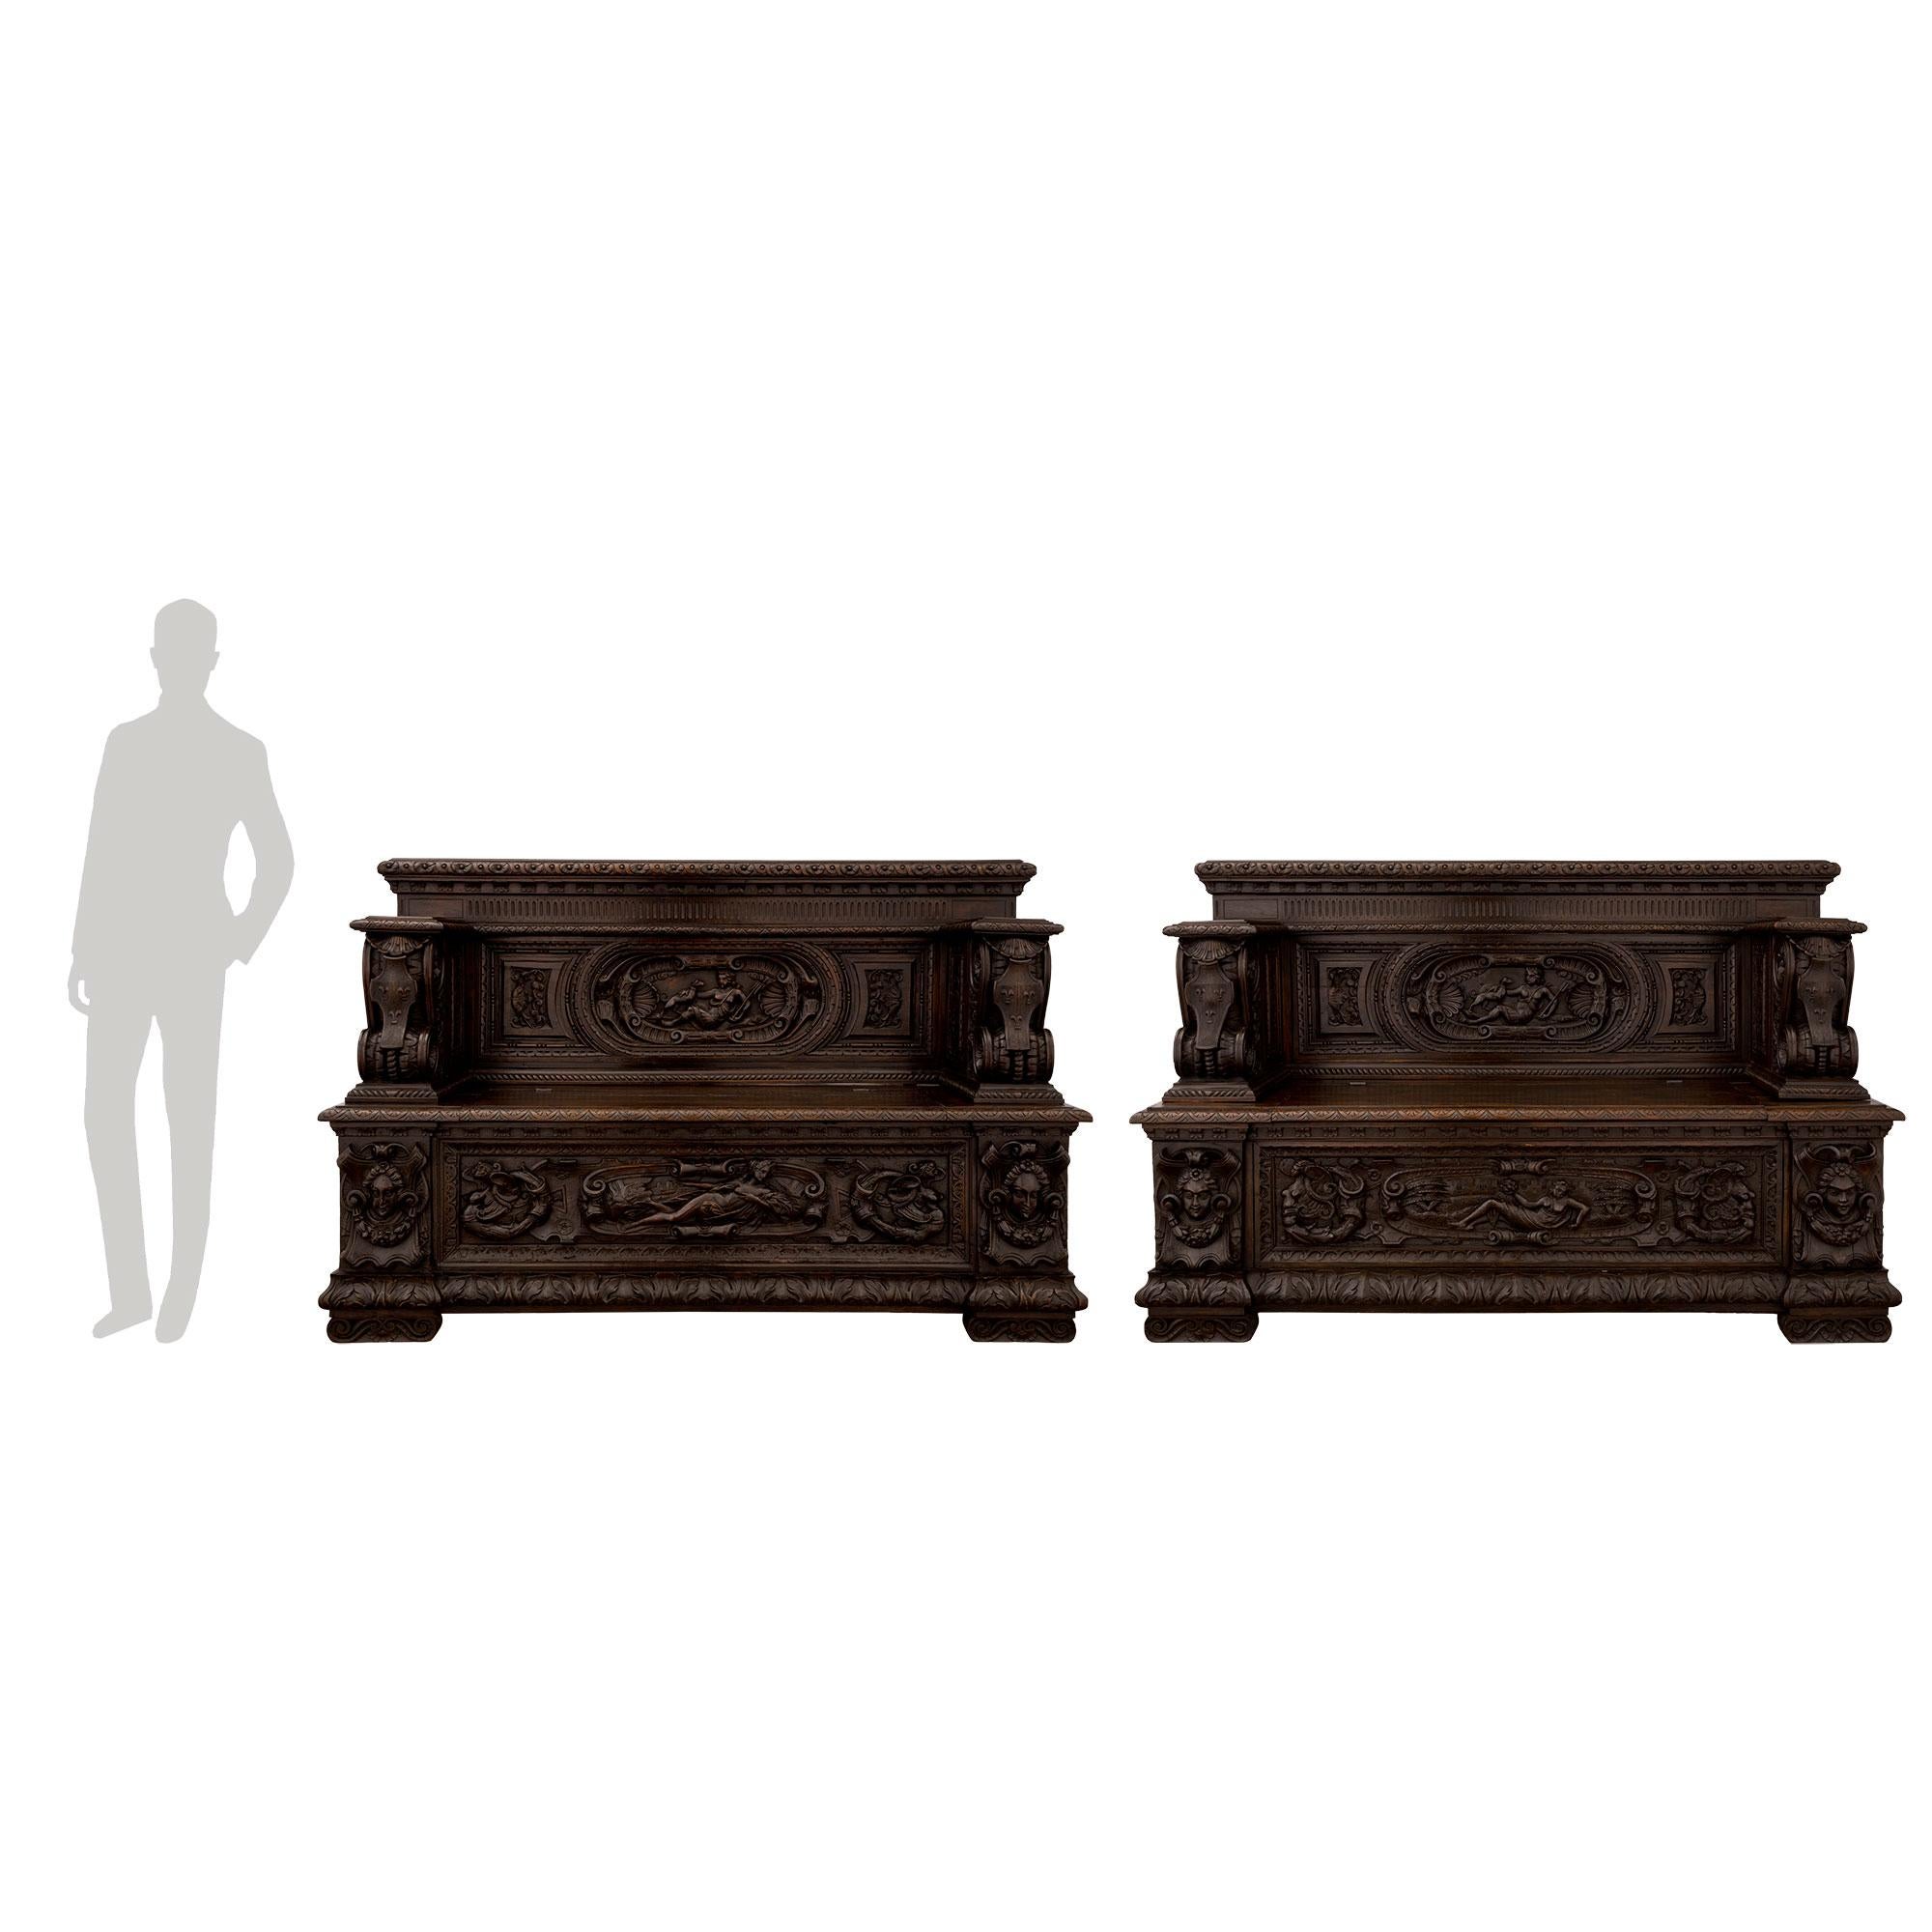 An extremely handsome and most impressive pair of French 19th century Renaissance st. patinated dark oak benches, circa 1870. Each bench is raised by fine scrolled feet below the straight frieze with a superb carved foliate band. At the center of